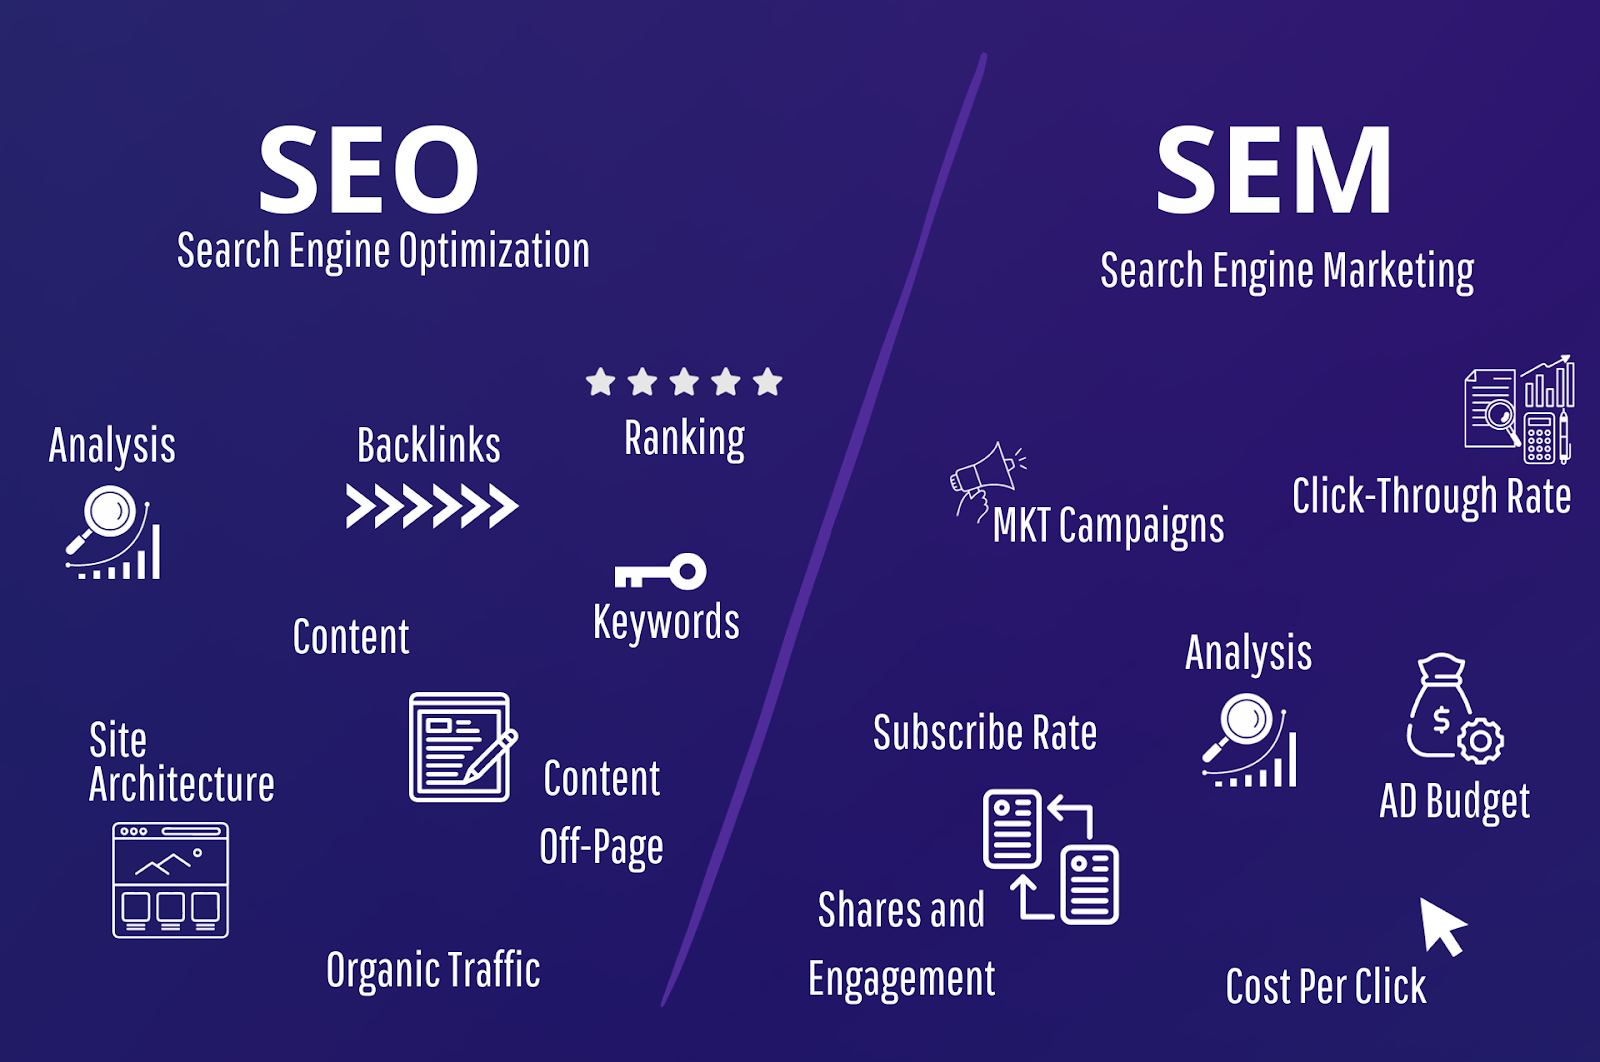 Infographic by Vasta comparing SEO and SEM, showcasing keywords, backlinks, and ad campaigns for eCommerce strategy.